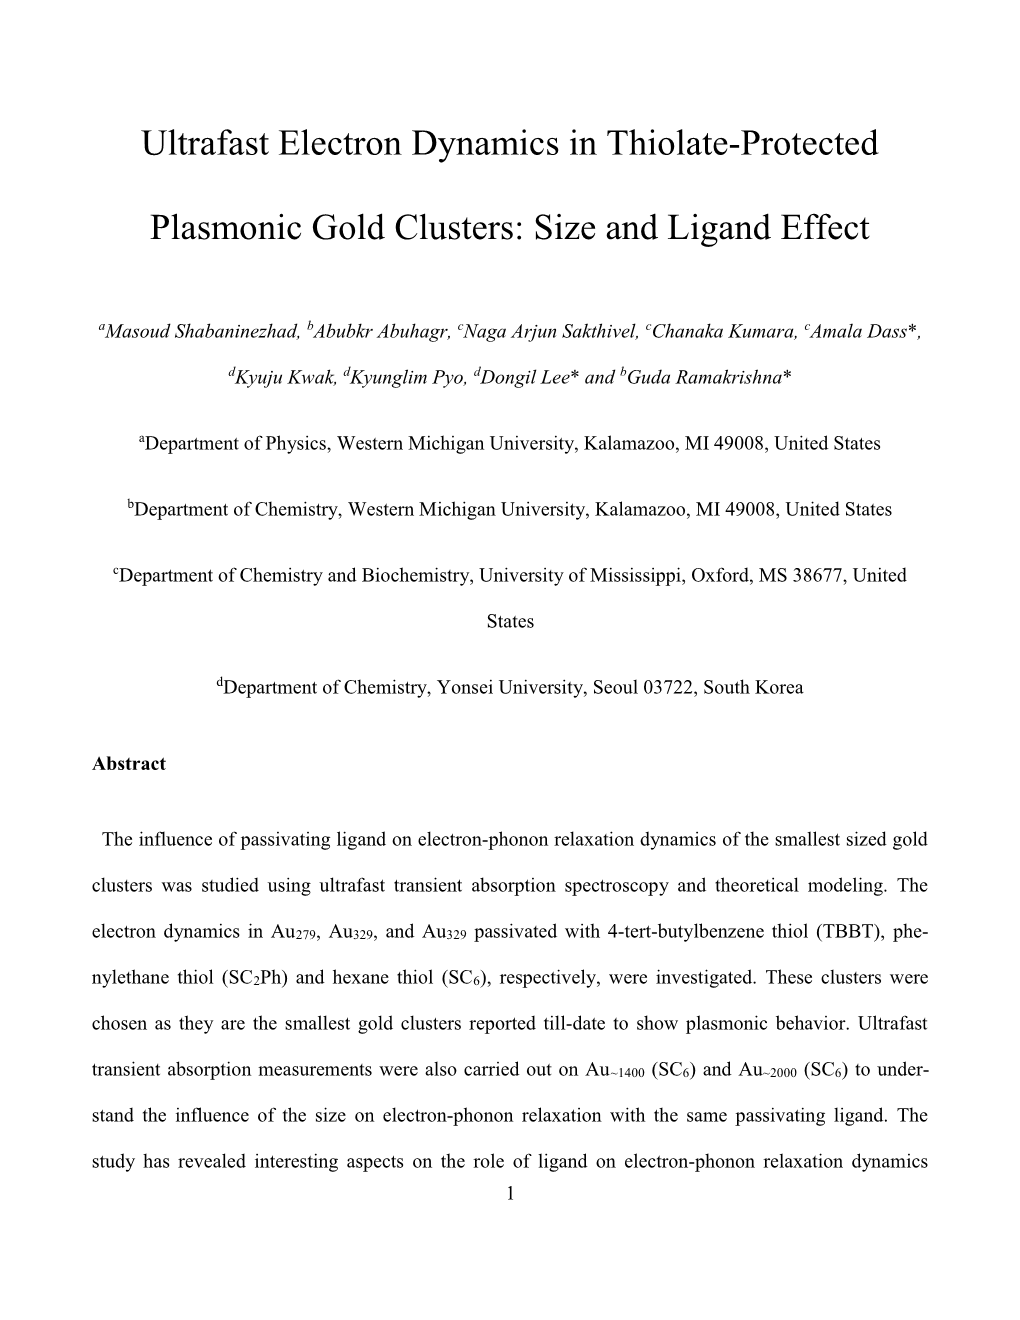 Ultrafast Electron Dynamics in Thiolate-Protected Plasmonic Gold